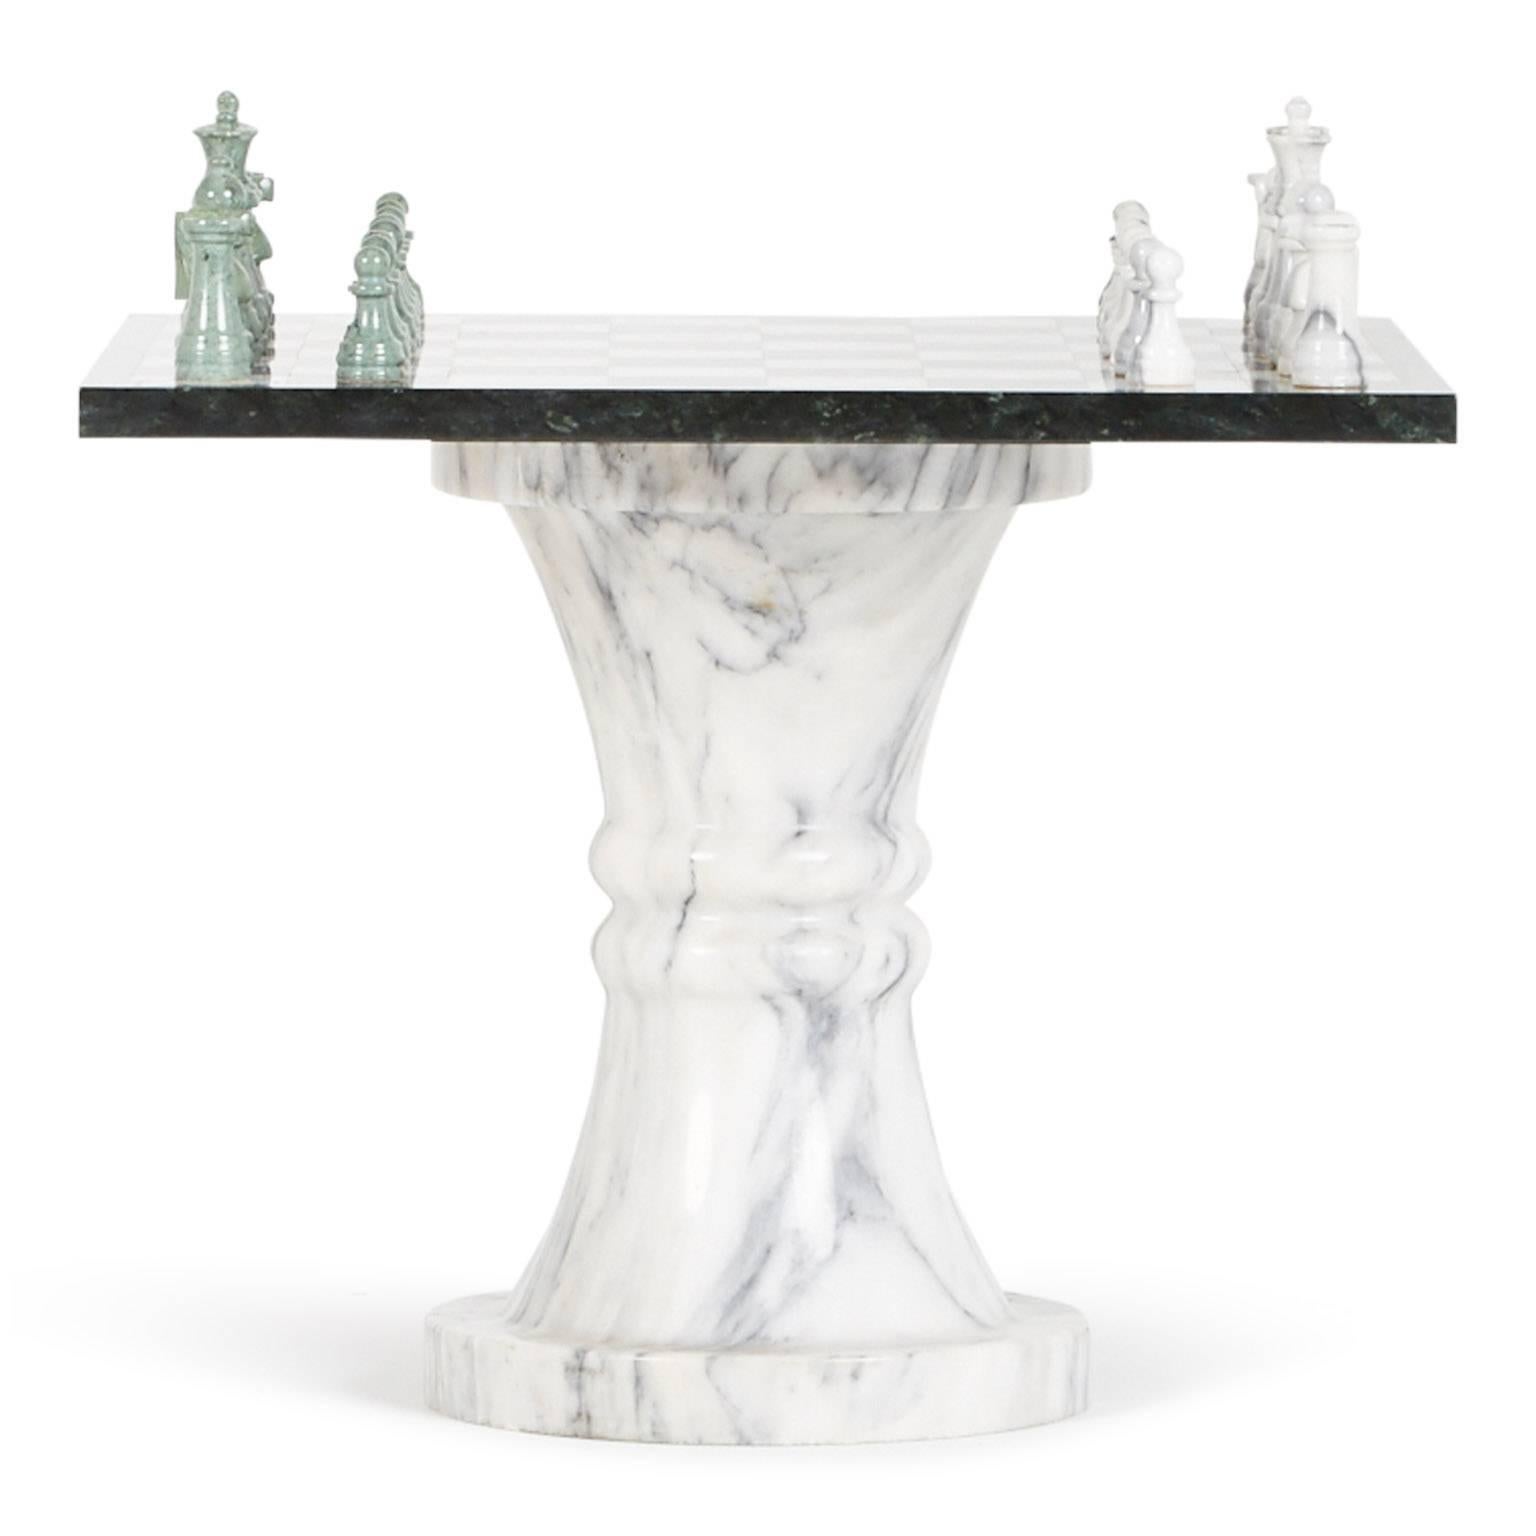 Stunning marble chess set which includes one pedestal table with removable chess board and two stools, as well as the full set of chess pieces. The fluted pedestal table and two matching stools are fabricated from solid Carrera marble and the seat